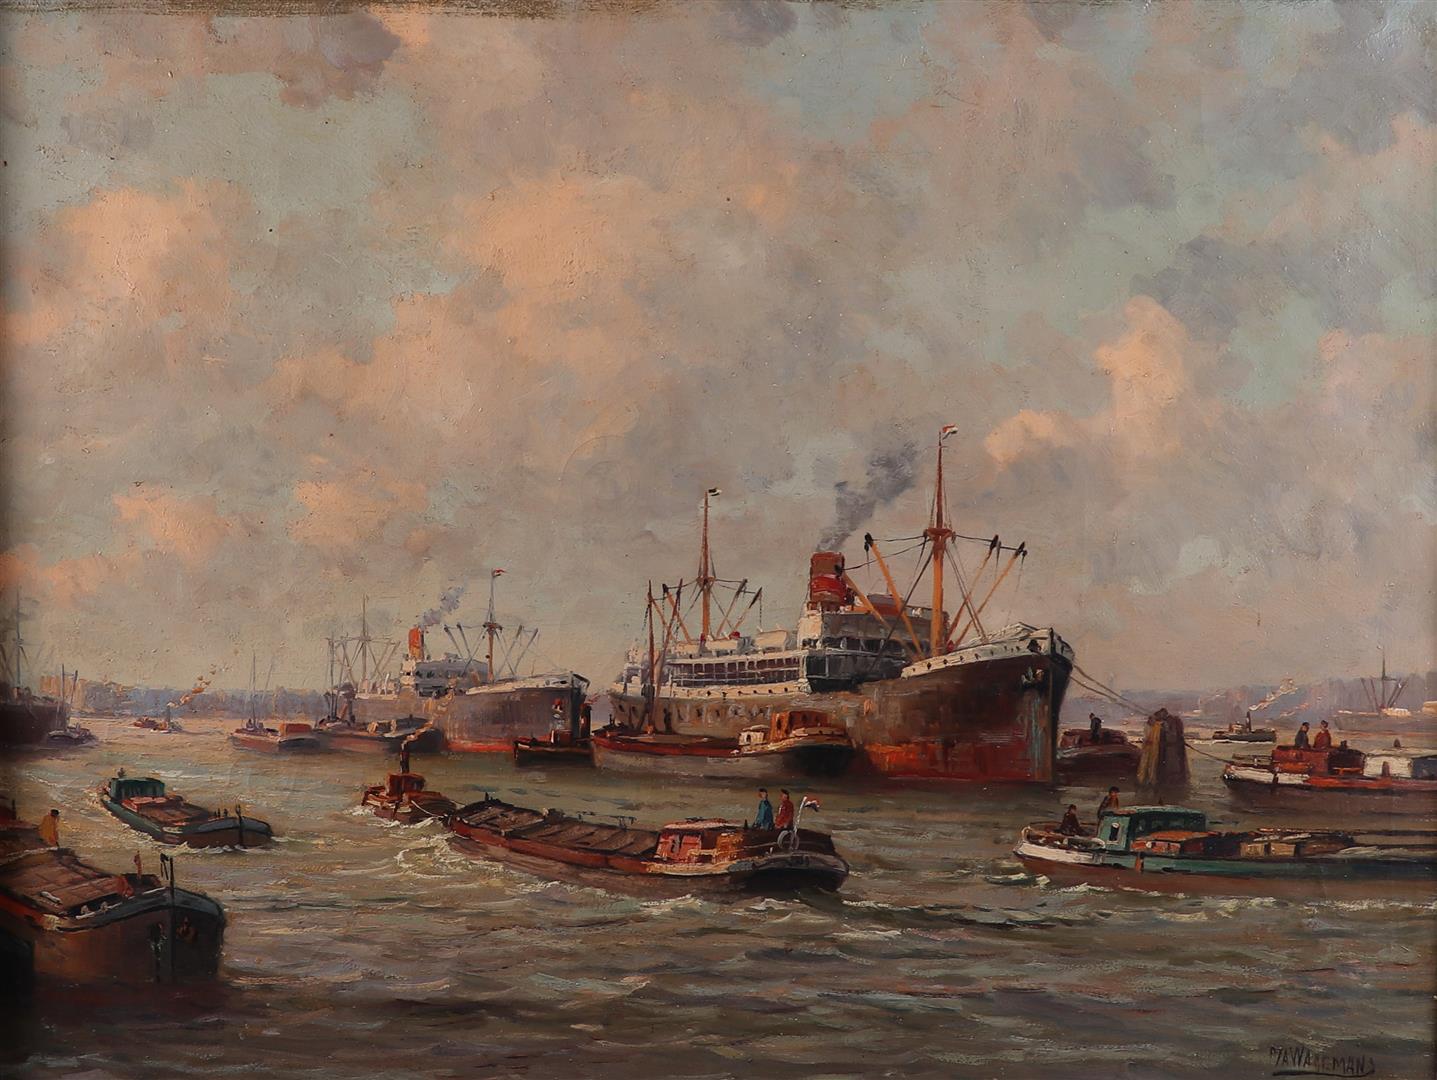 P.A. Wagemans (The Hague, 25 August 1879 - The Hague, 30 August 1955). Shipping in Rotterdam harbor